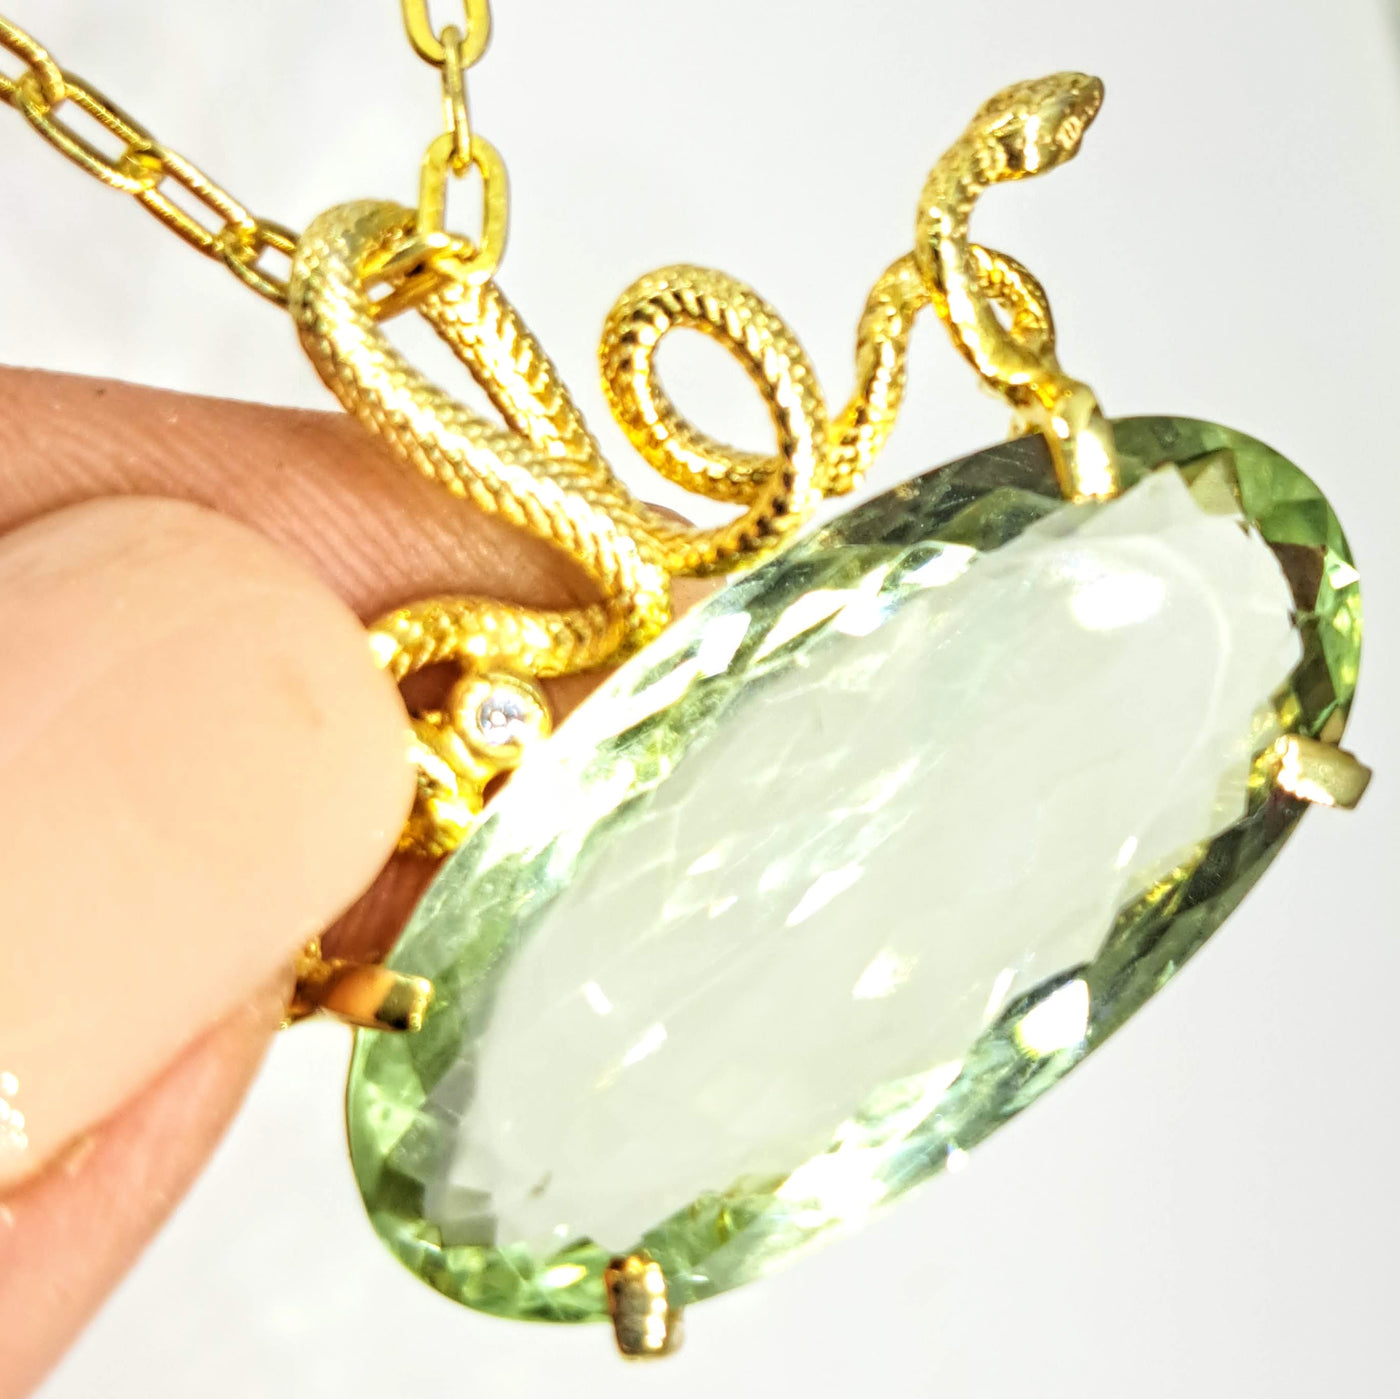 "Come, Slither!" 20-22" Necklace - Green Amethyst, Zircon Stone, Gold Sterling, 18k